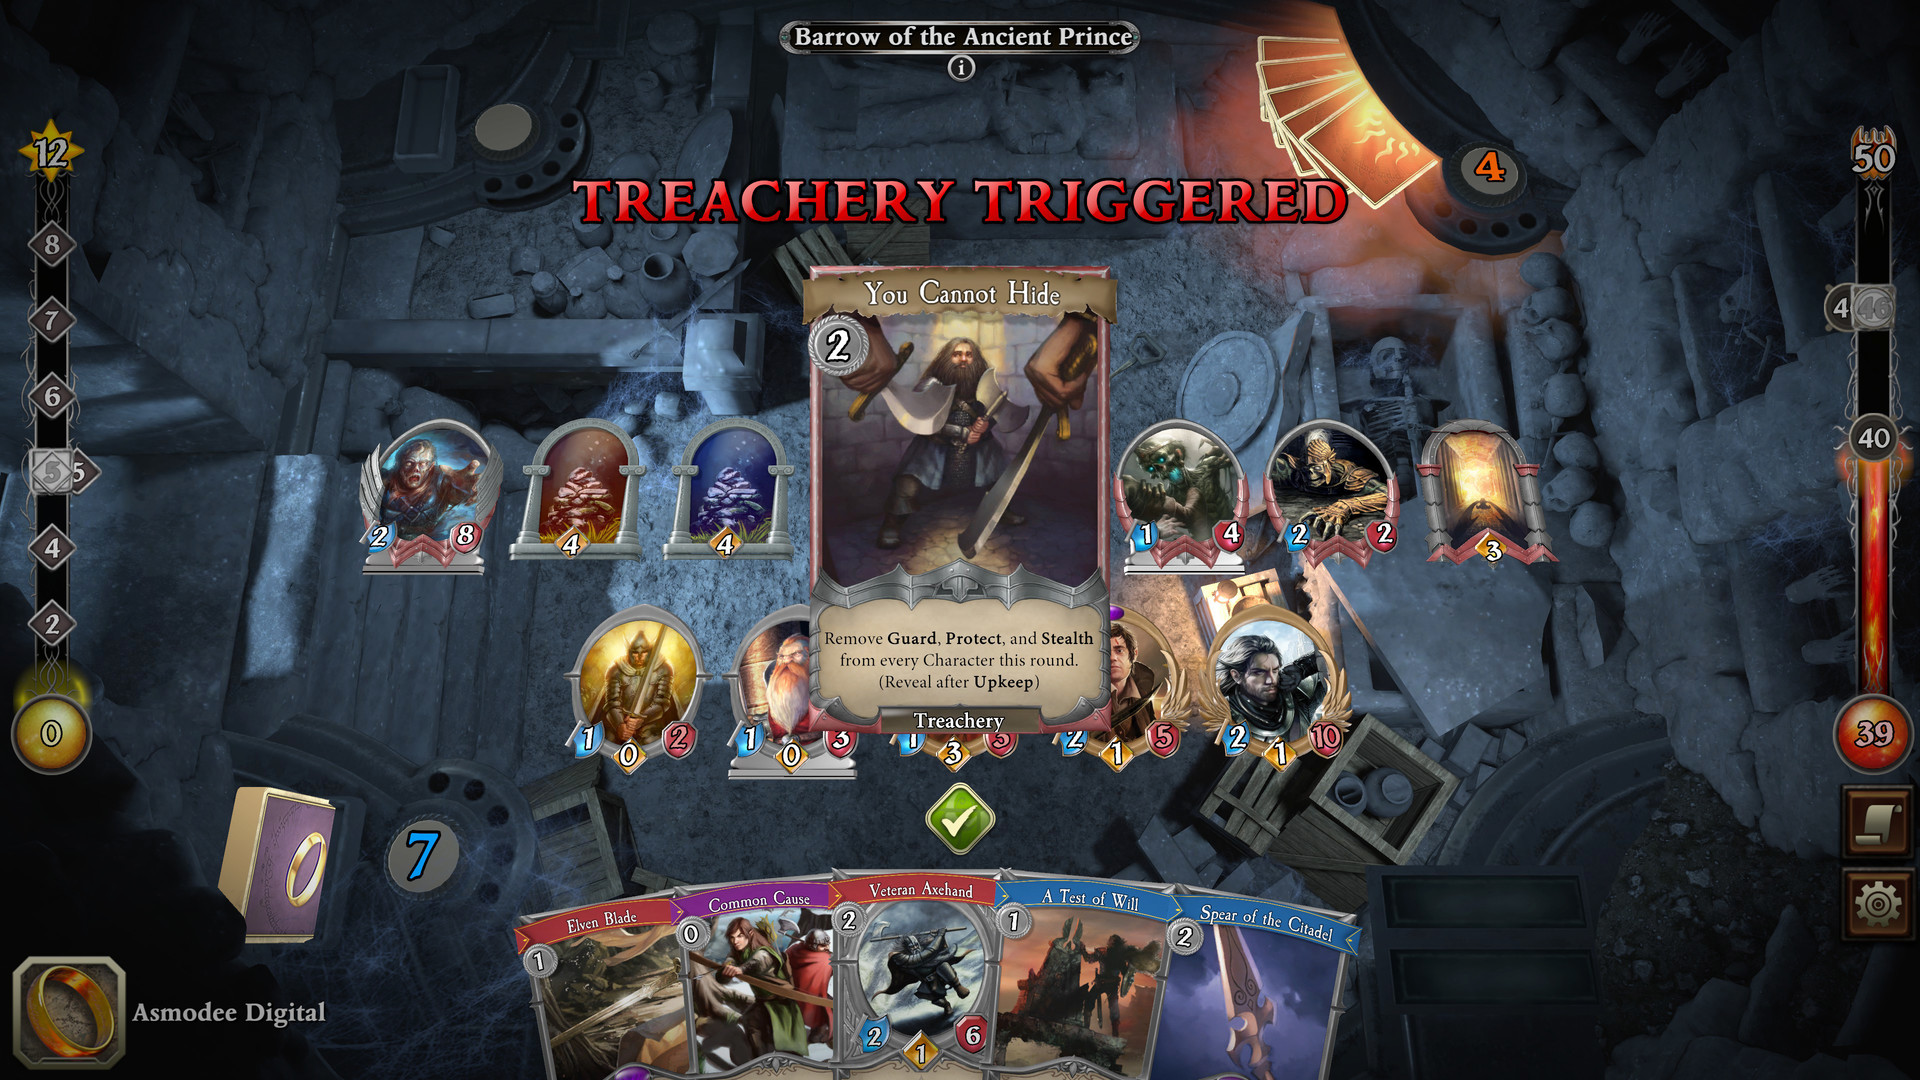 Gelijk Verfijning protest The Lord of the Rings: Adventure Card Game - Definitive Edition on Steam